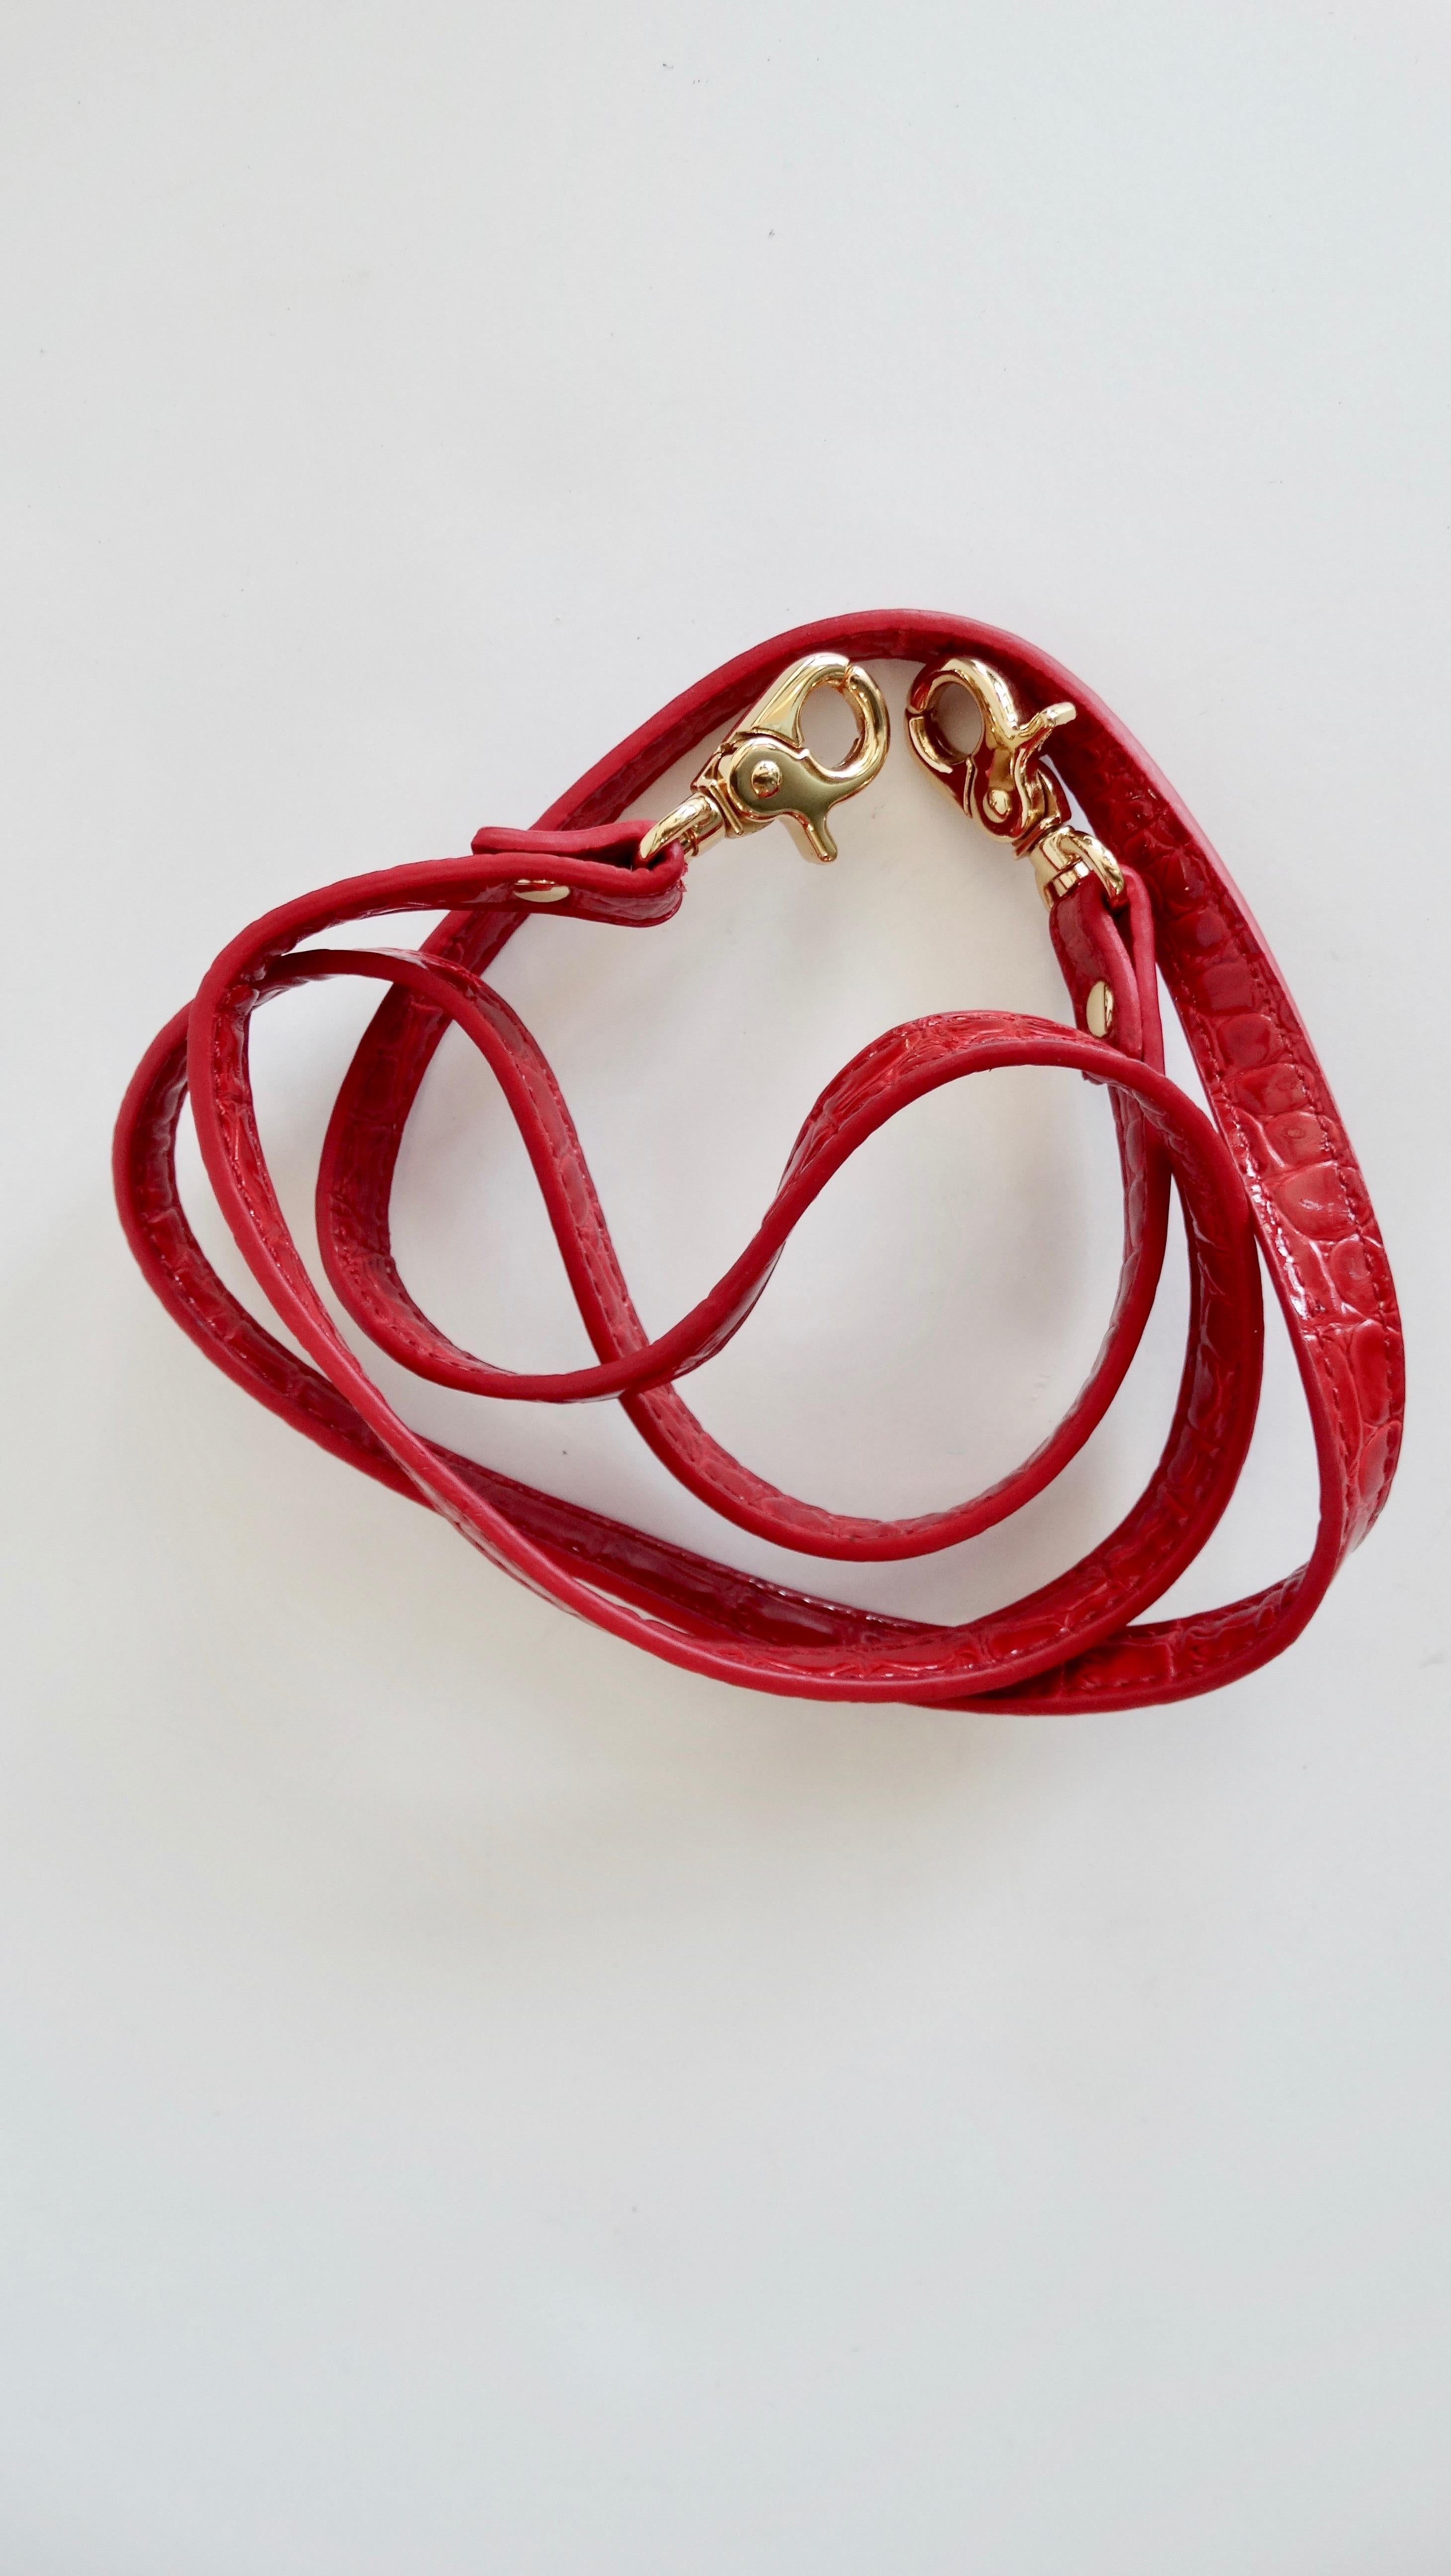 Rare Vivienne Westwood Red Chancery Heart Bag 5